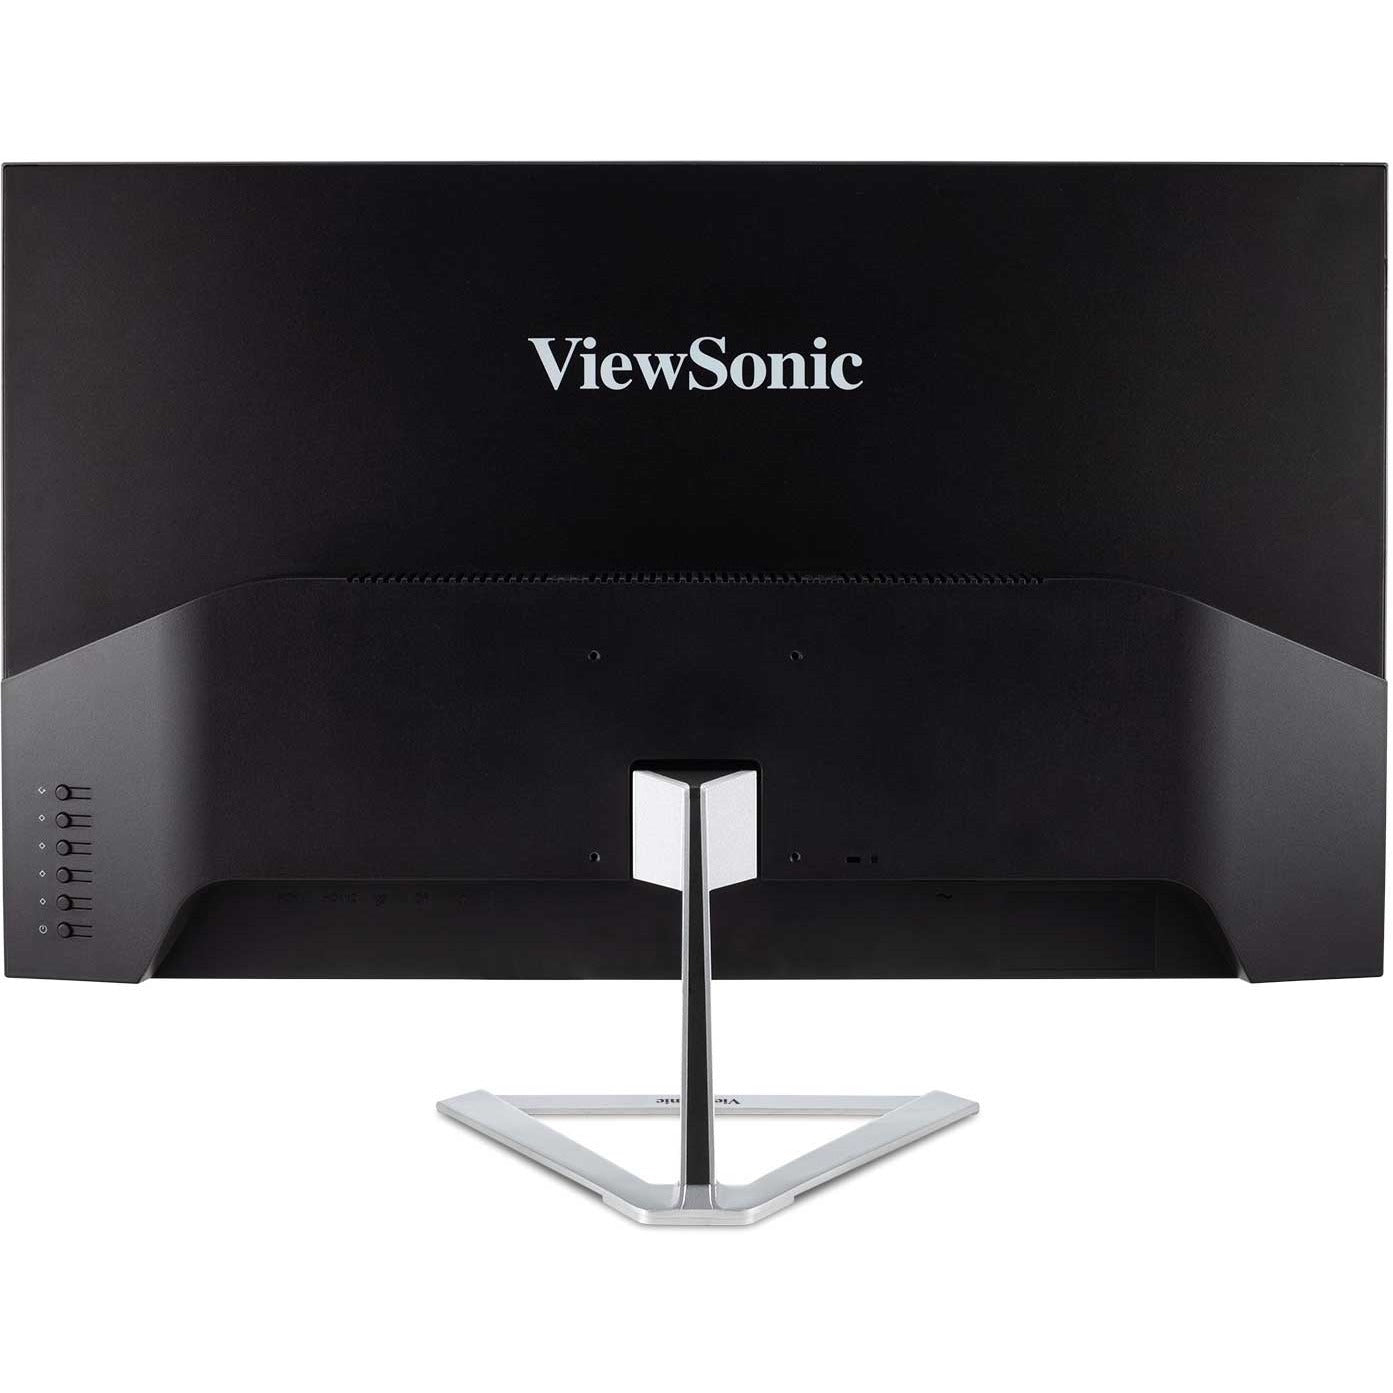 viewsonic-vx3276-4k-mhd-32-inch-4k-uhd-monitor-with-ultra-thin-bezels-hdr10-hdmi-and-displayport-for-home-and-office-vx3276-4k-mhd-4k-uhd-monitor-with-ultra-thin-bezels-hdr10-hdmi-and-displayport-300-cd-m2-32_vewvx32764kmhd - 4